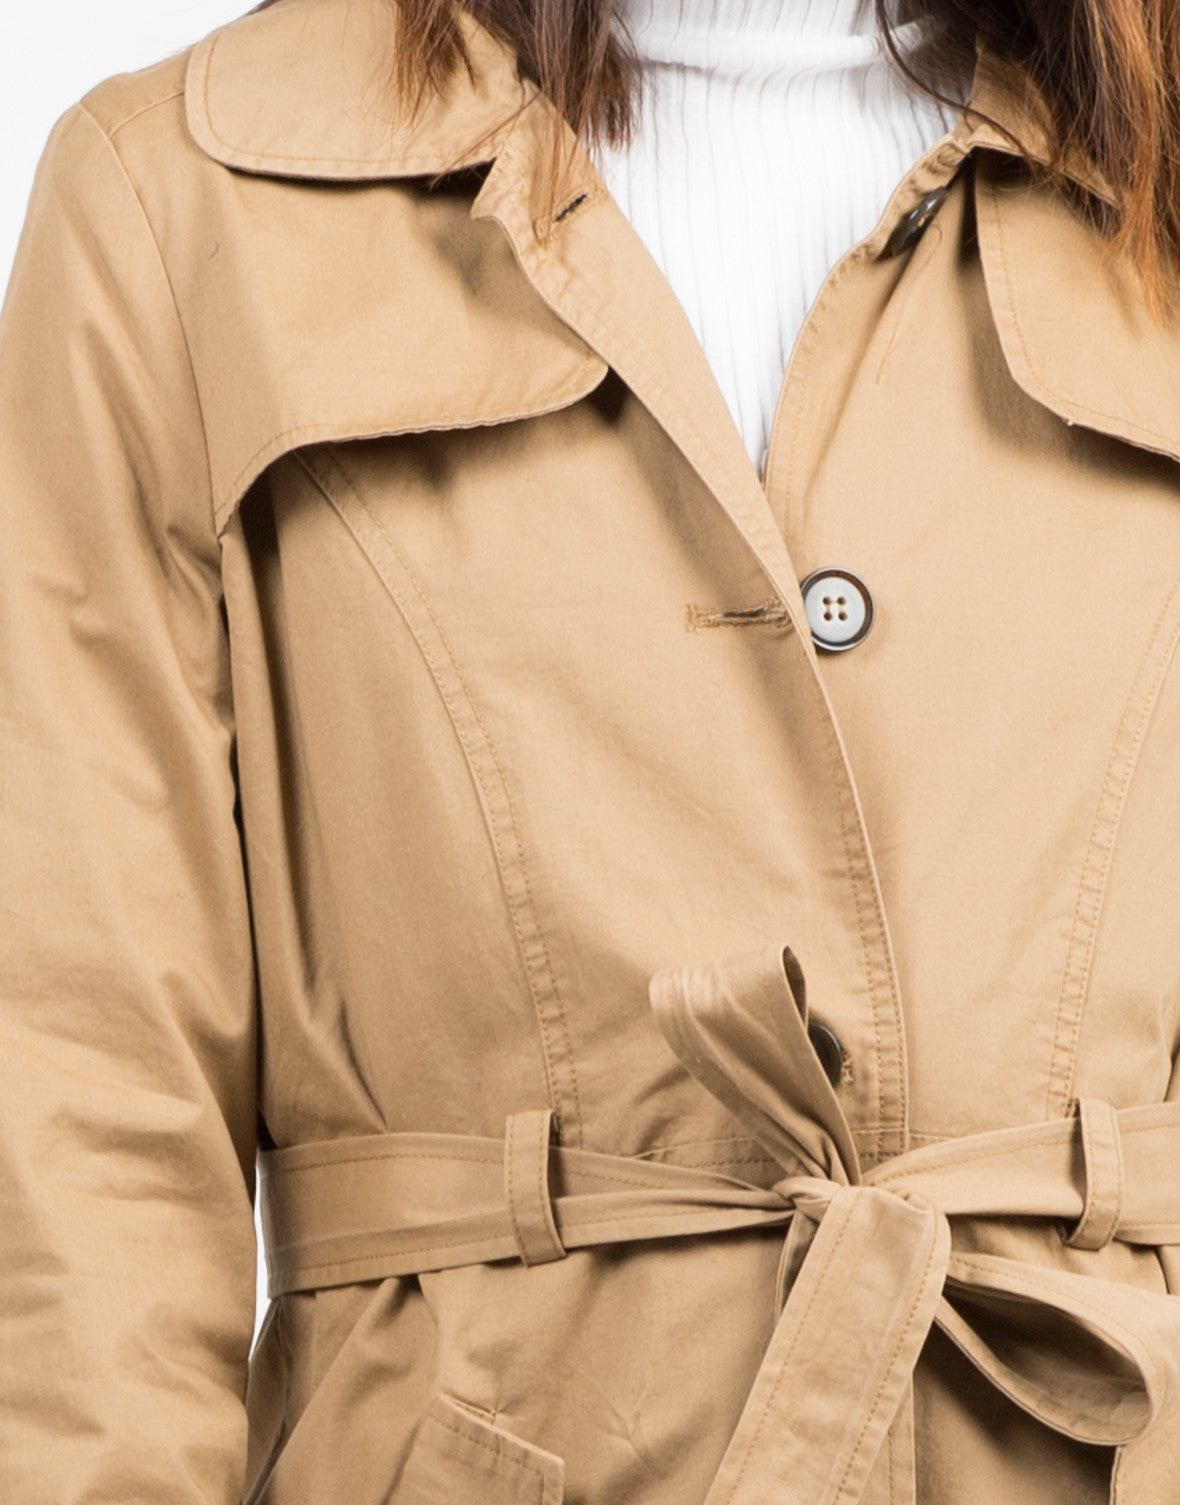 Button Front Belted Trench Coat - Tan Jacket - Lightweight Coat ...